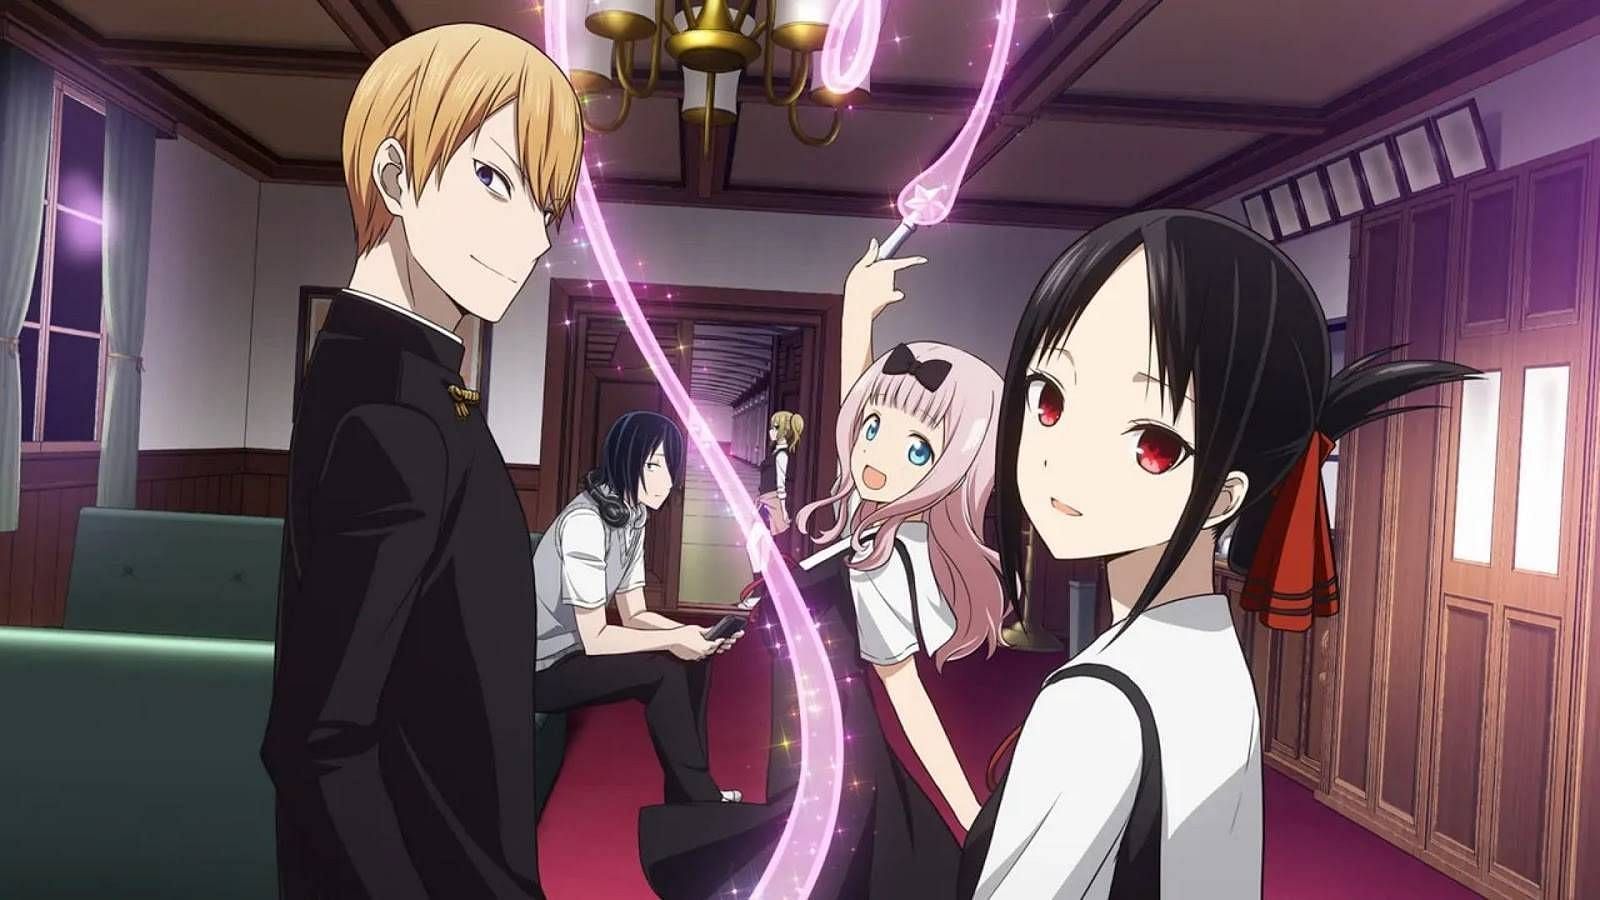 All Key characters of Kaguya Sama: Love is War! as seen in the anime (Image via A-1 Pictures)